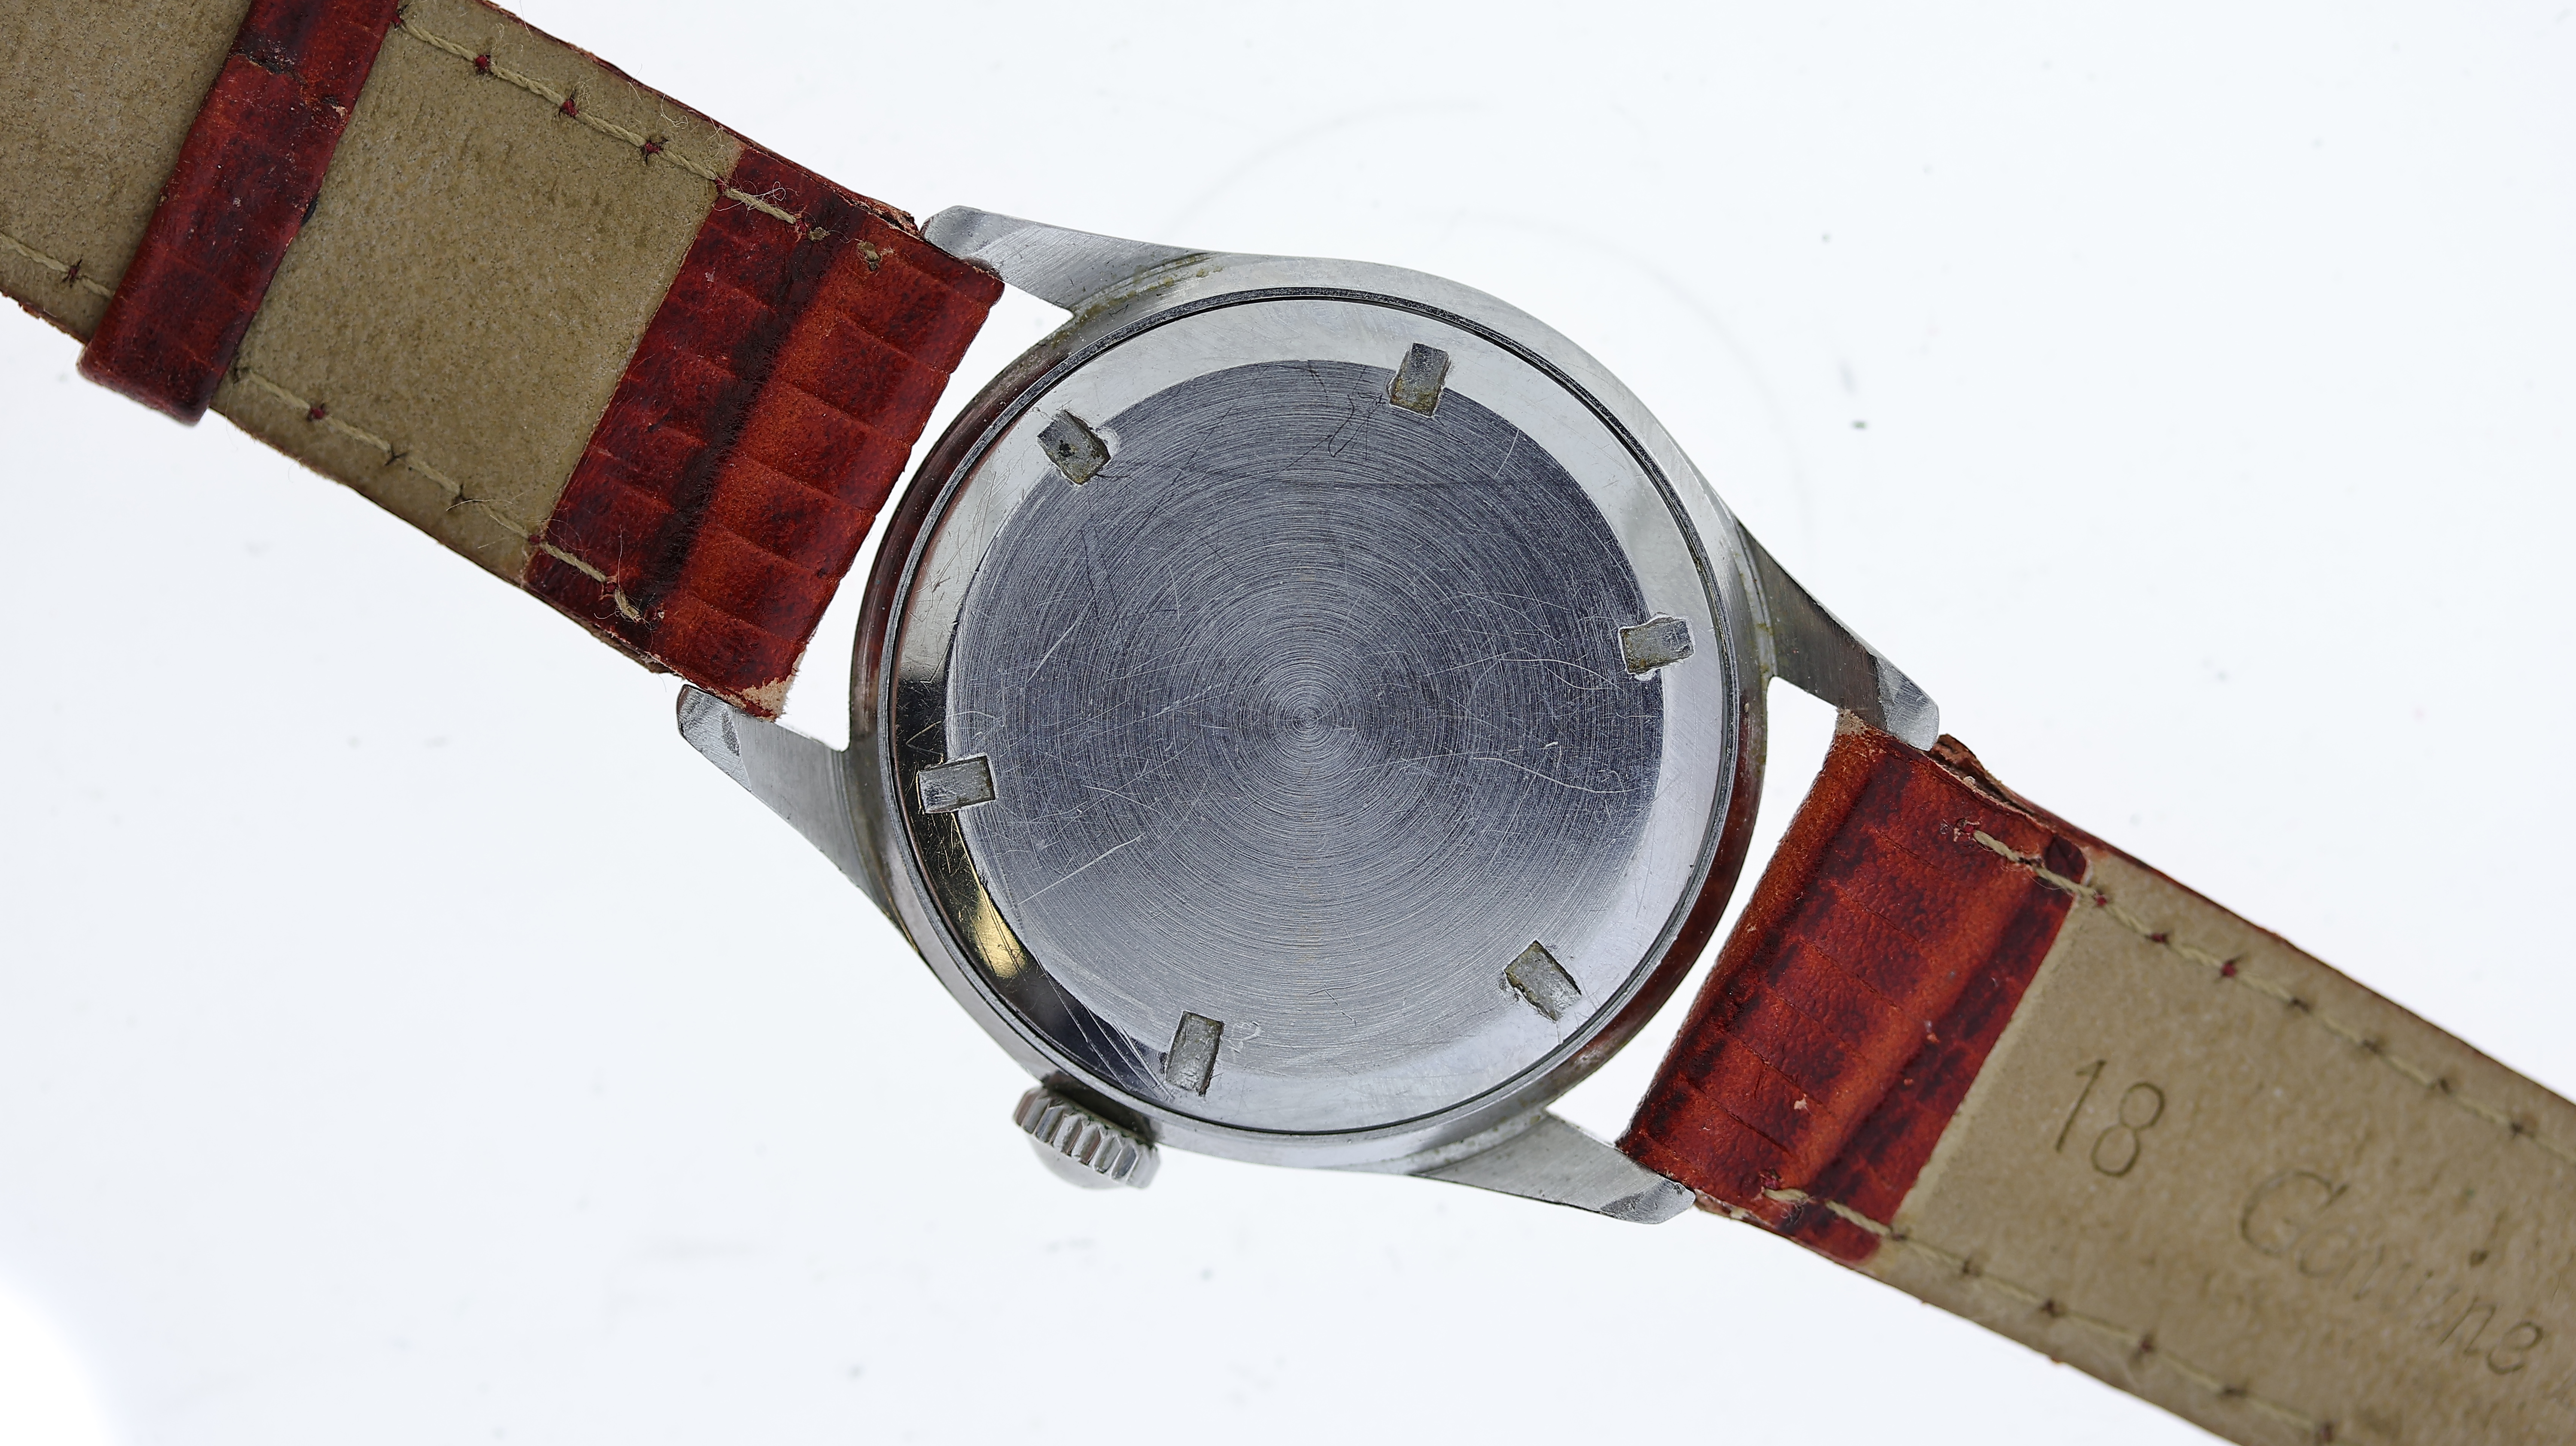 VINTAGE LONGINES MANUAL WIND REFERENCE 6402 CIRCA 1950's - Image 2 of 2